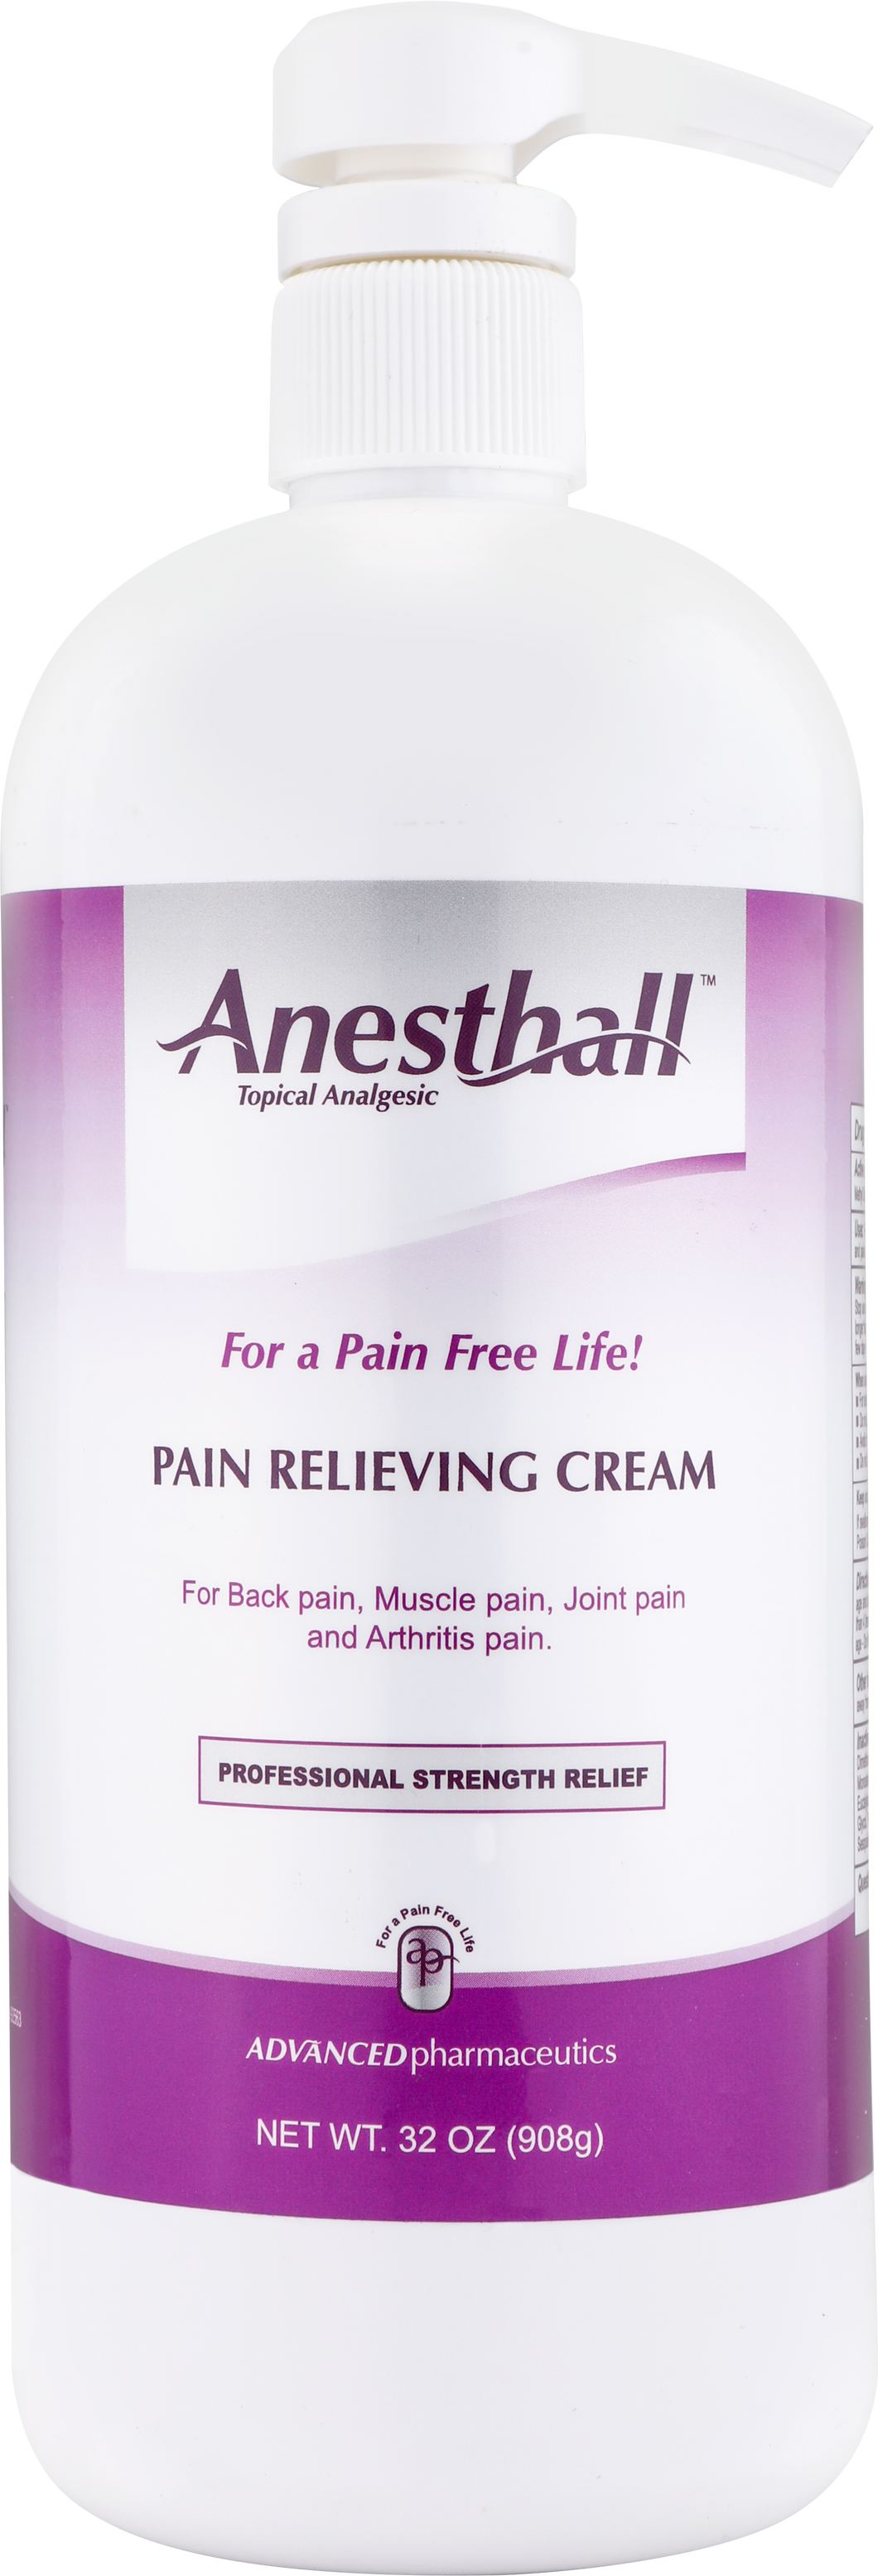 Anesthall Pain Relieving Cream 32 OZ. Pump Bottle - 4 Pack